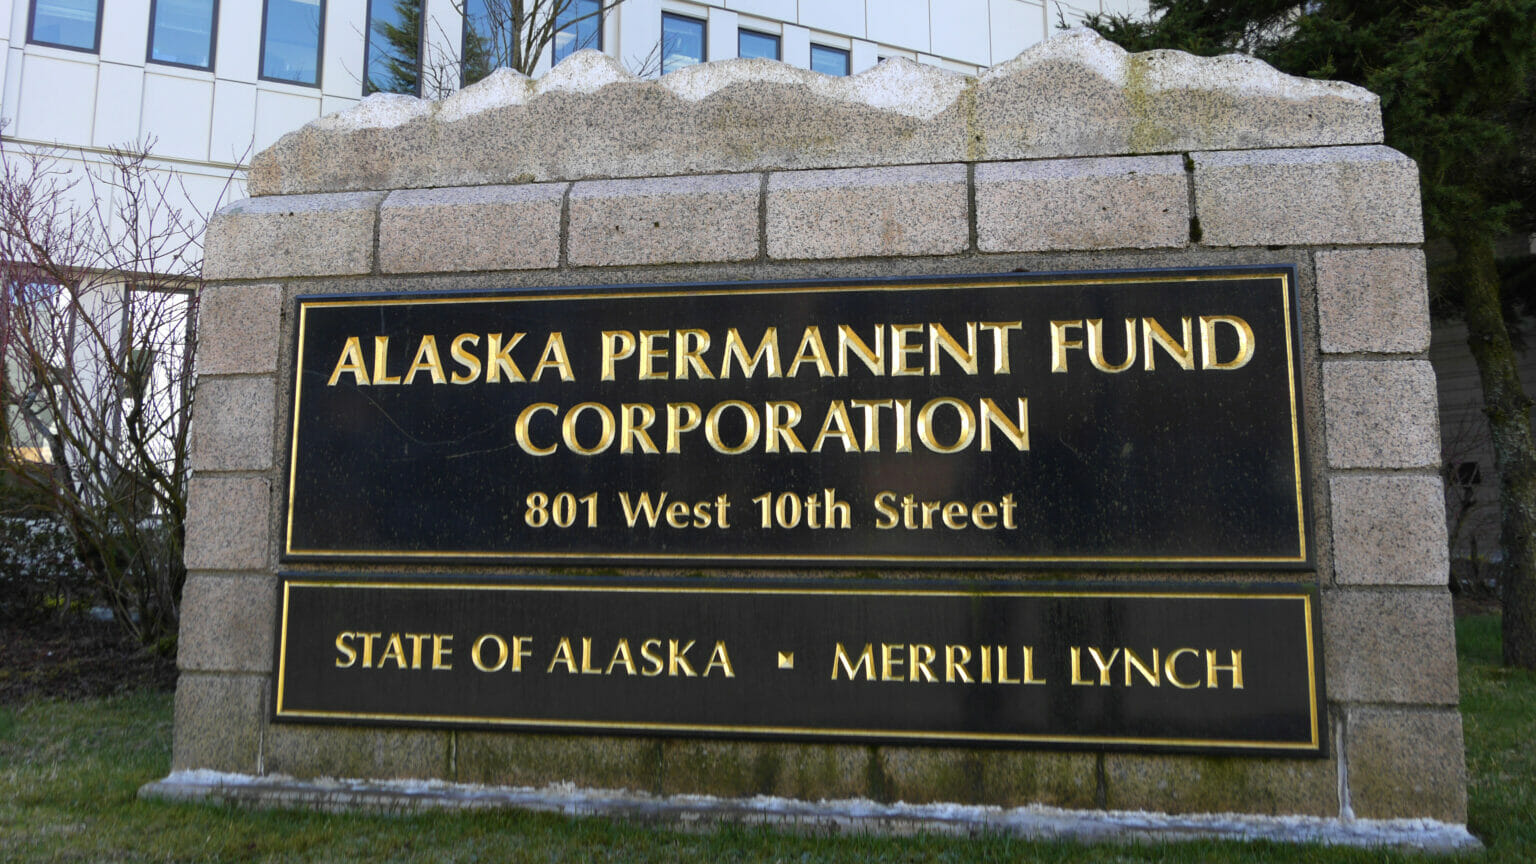 Alaska Permanent Fund Corp. buys multimillion-dollar stake in grocery chain Three Bears